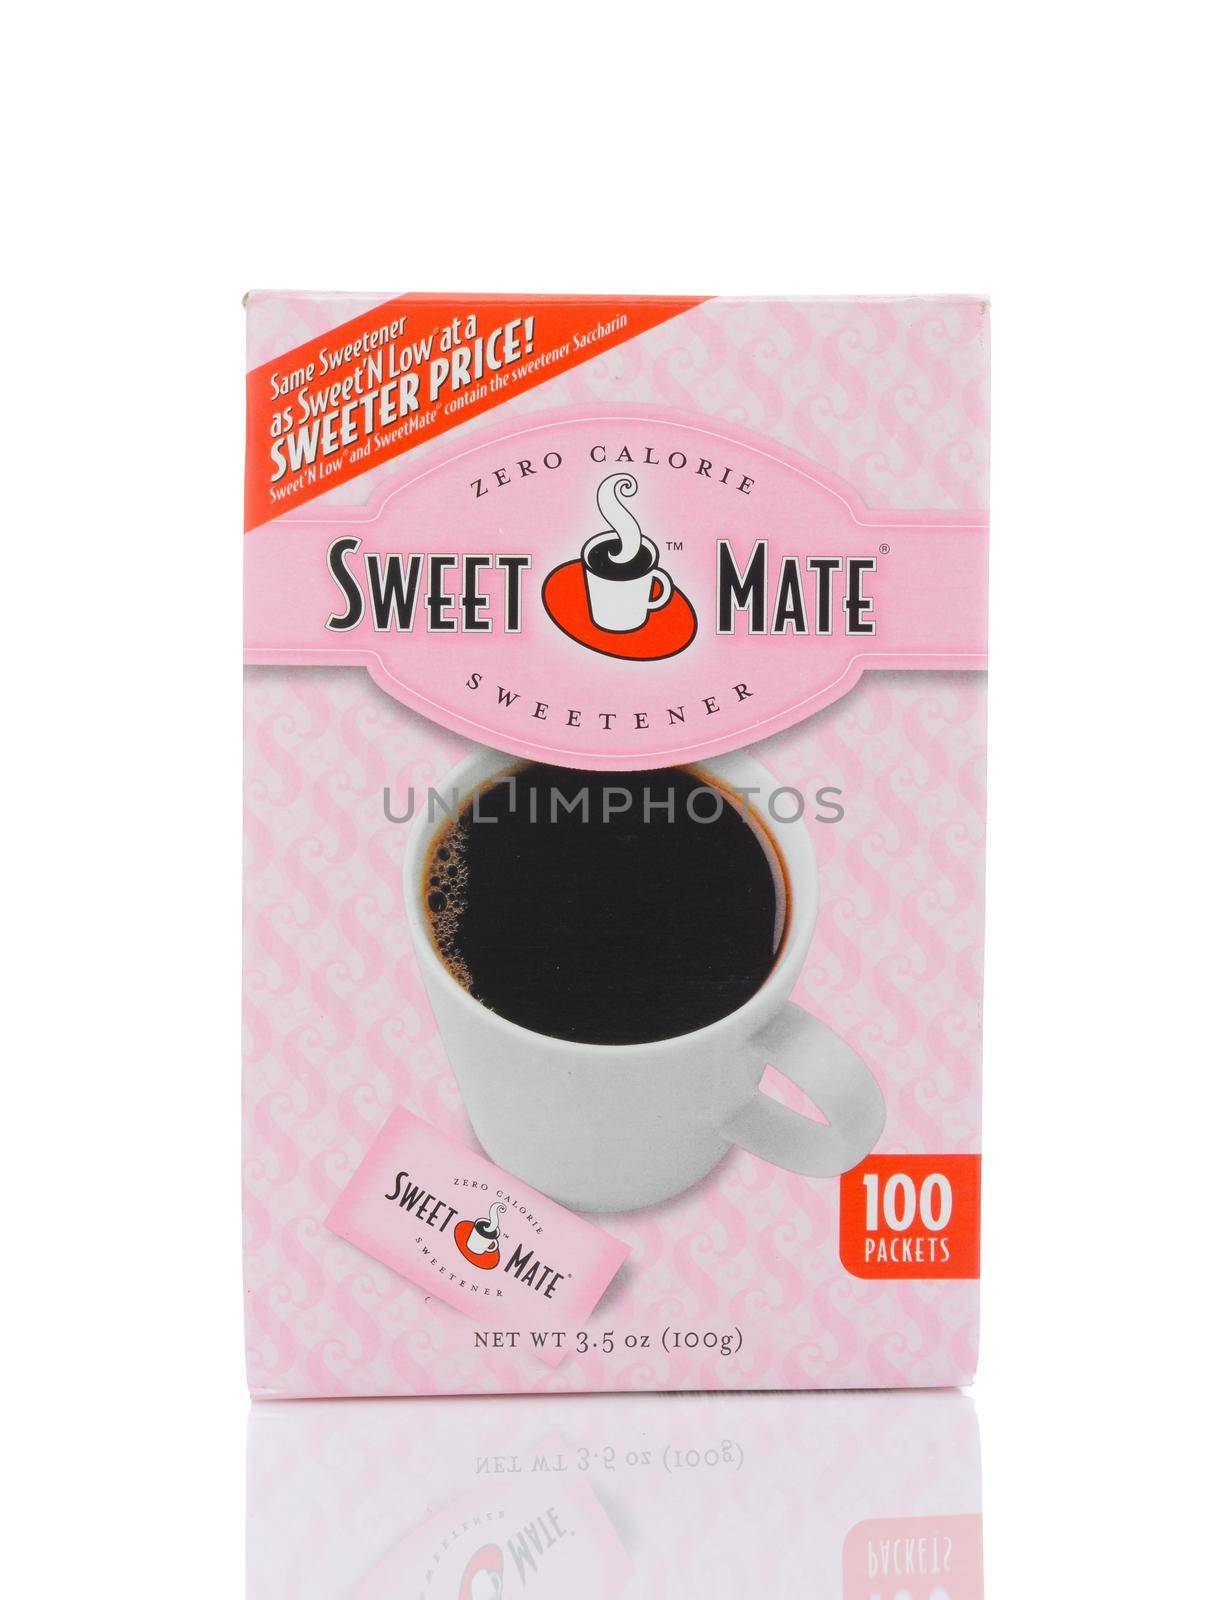 A 100 count package of Sweet Mate Zero Calorie Sweetener. by sCukrov